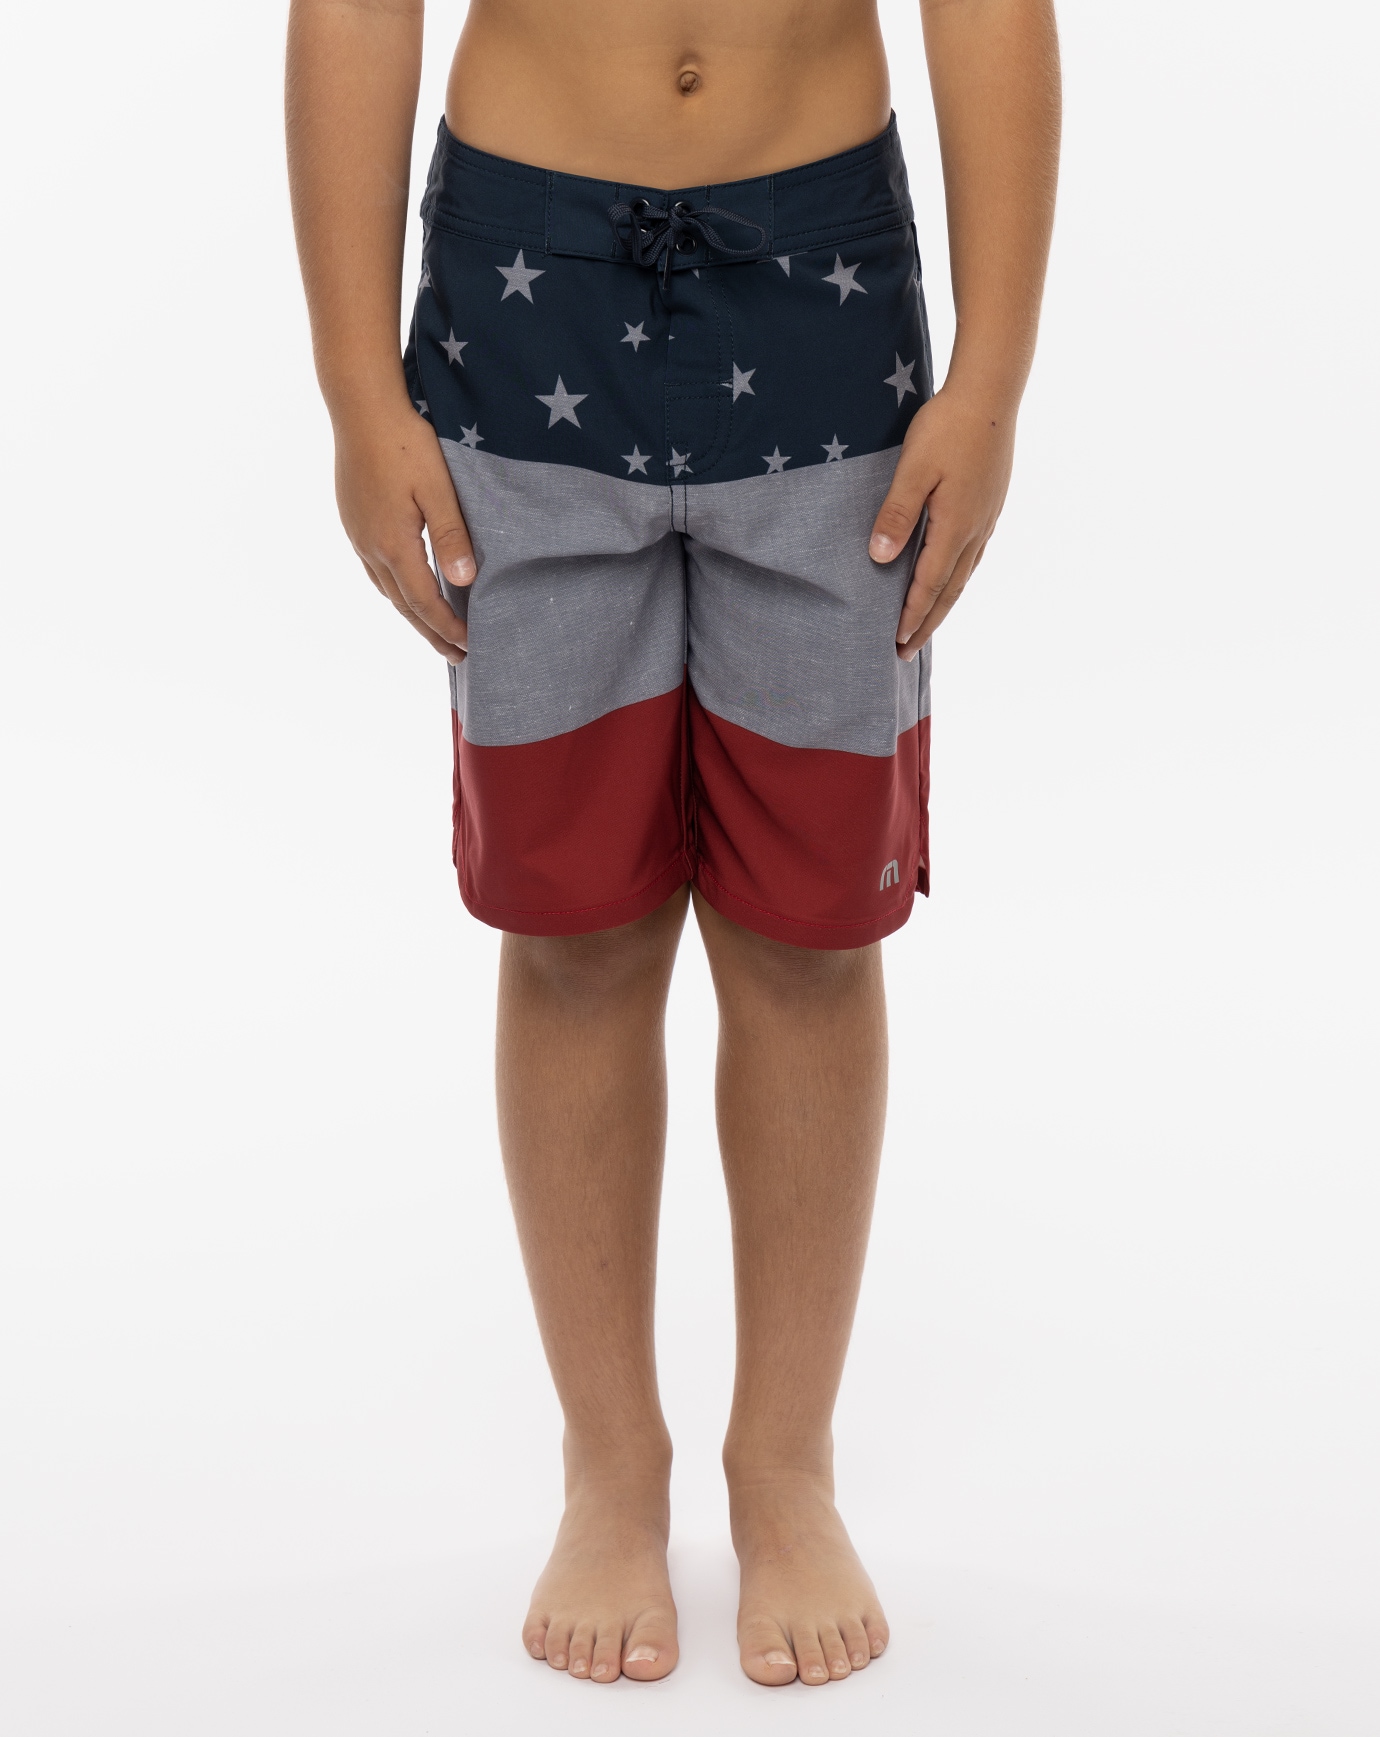 Related Product - WATER SLIDE YOUTH BOARDSHORT